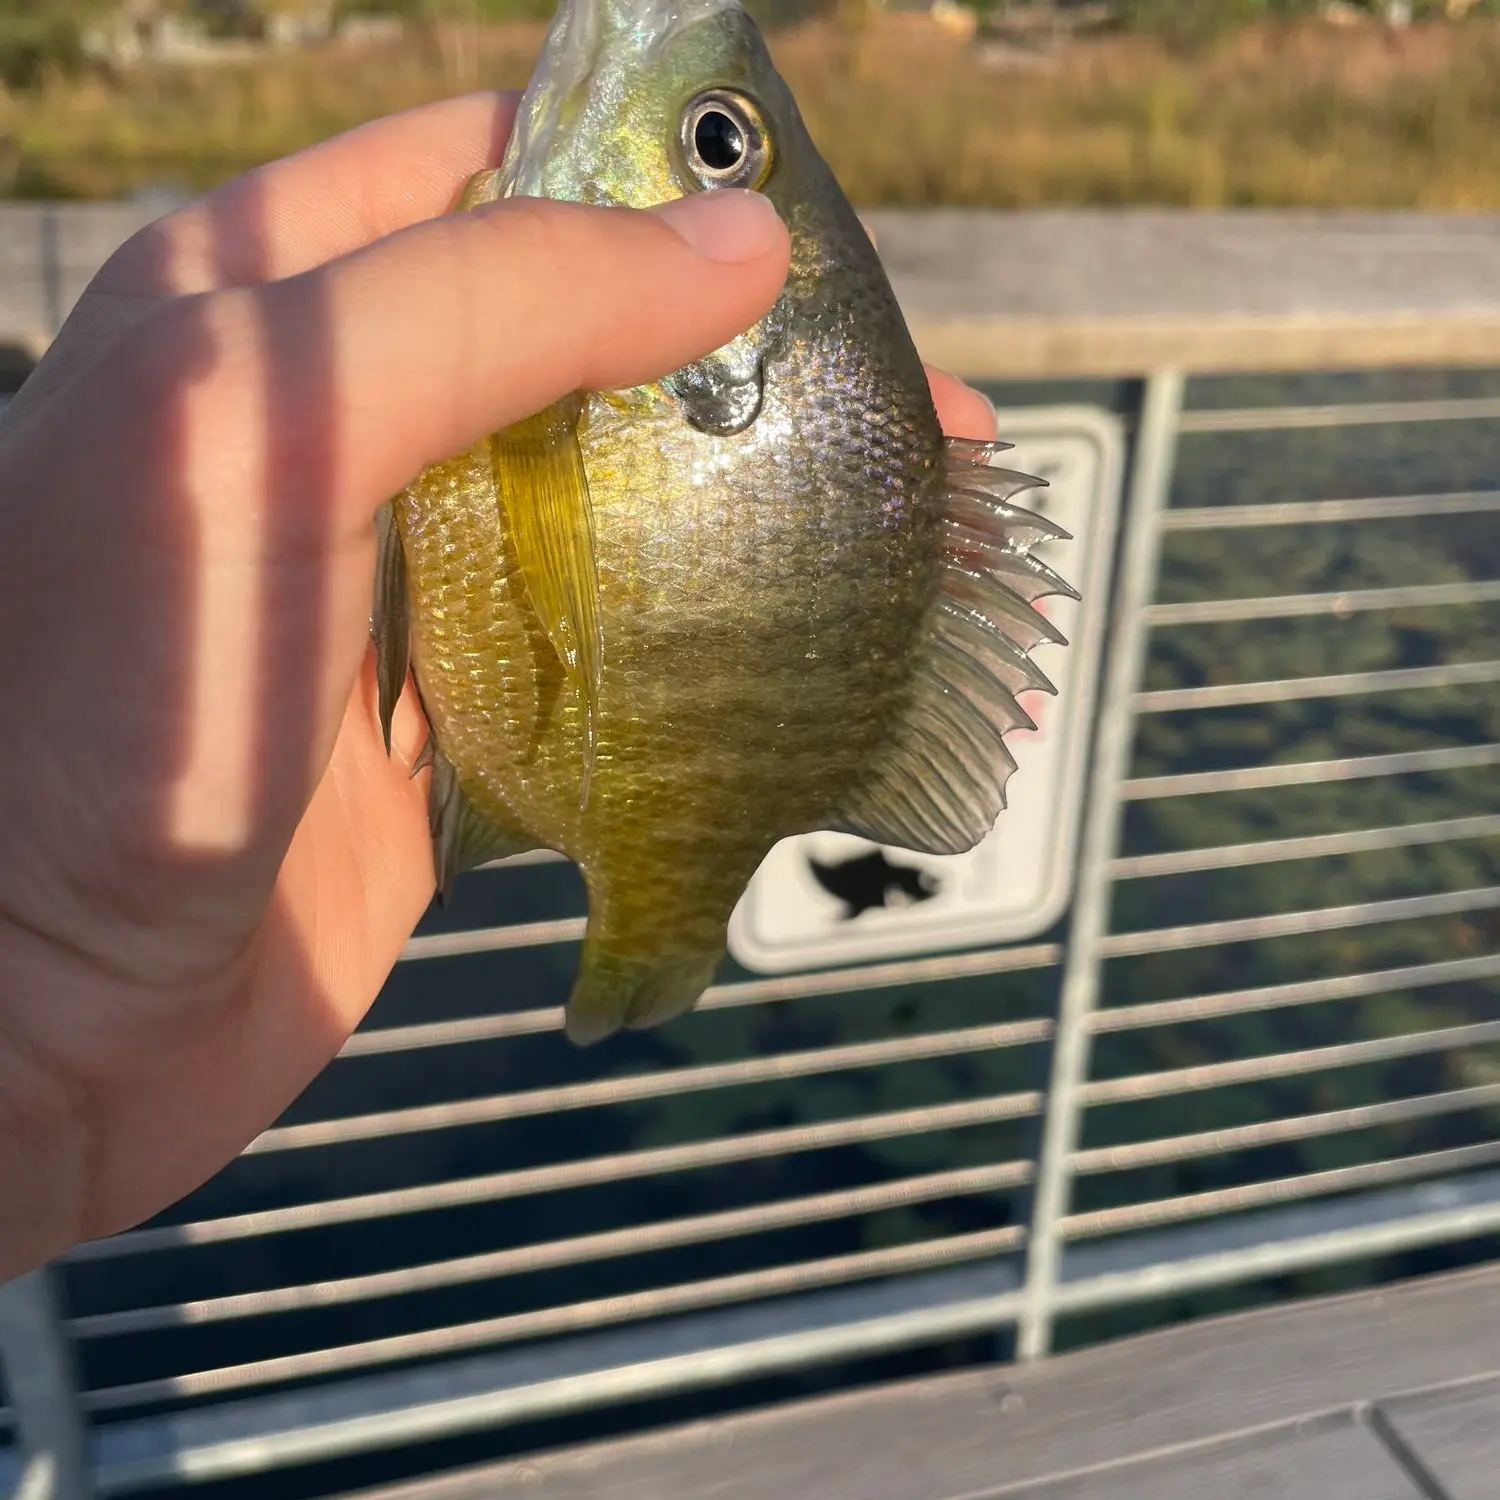 Grand Valley Preserve Fishing Reports